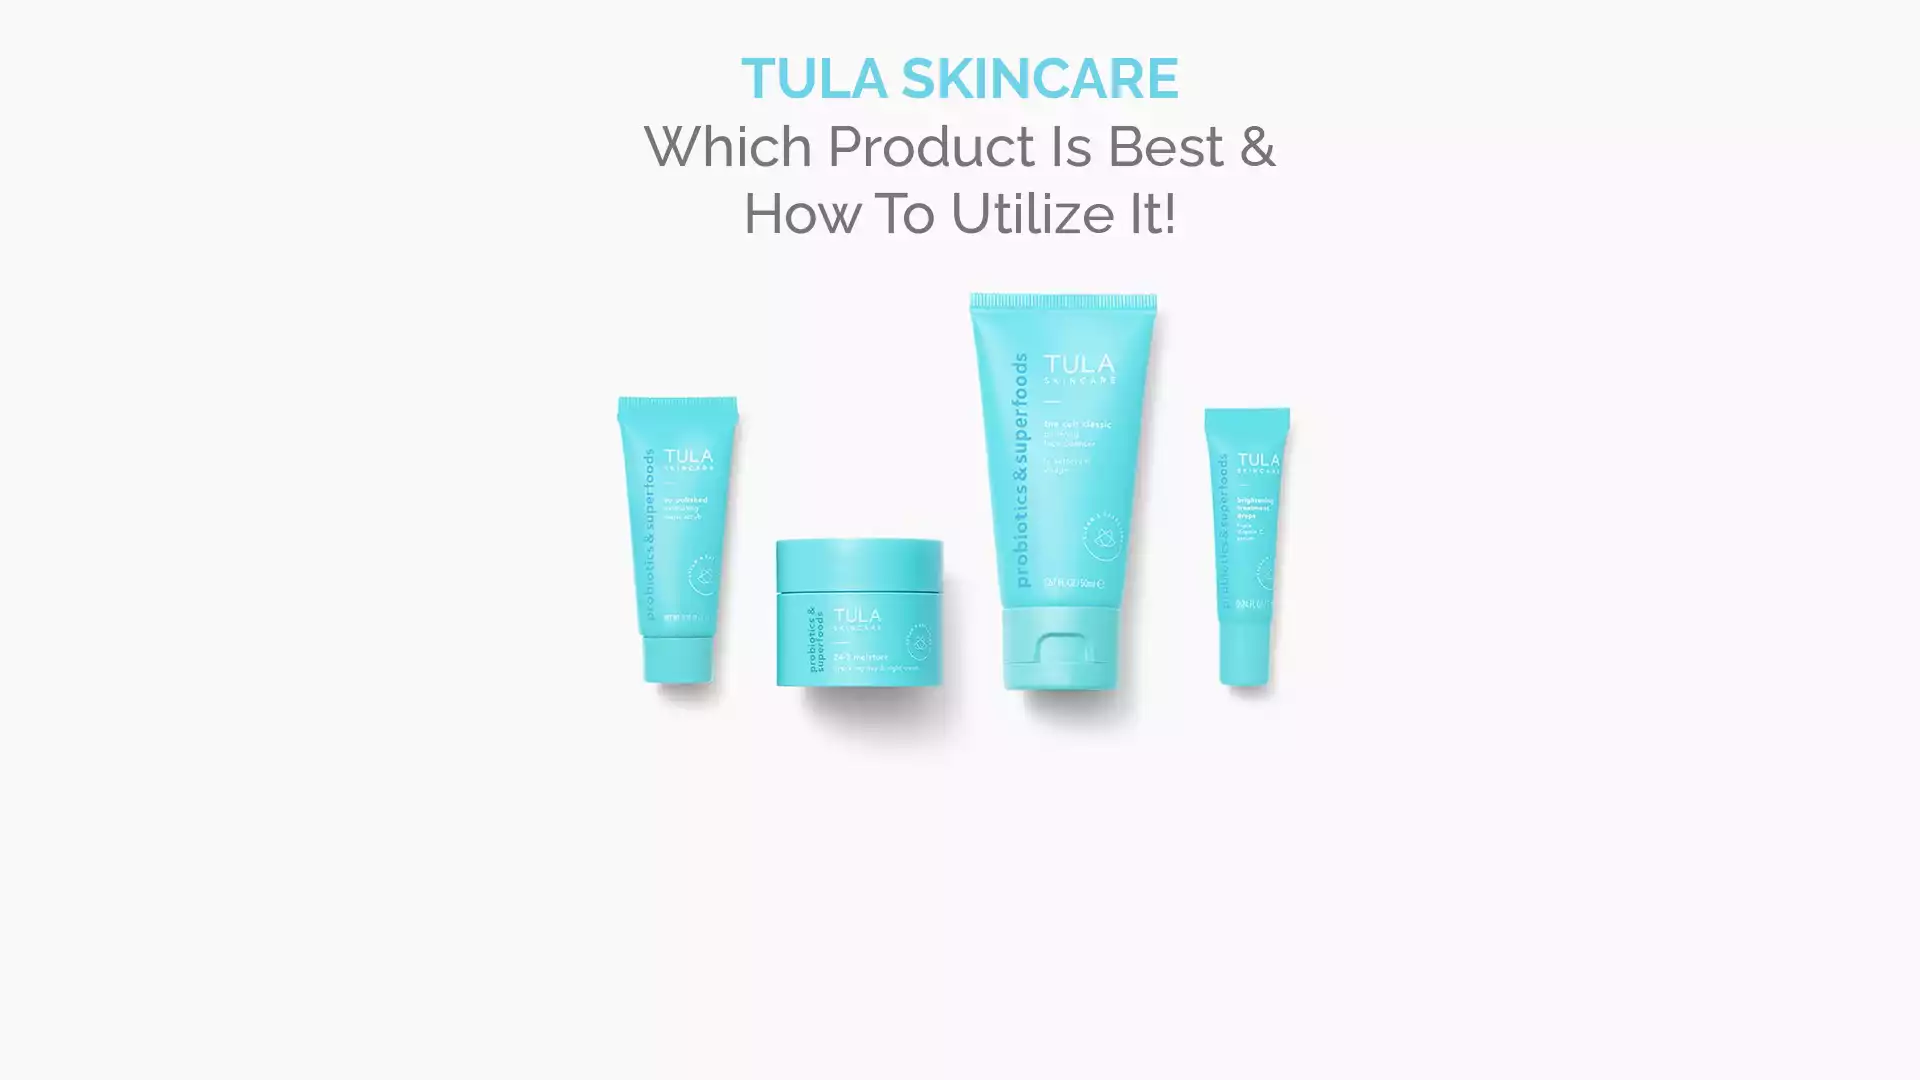 Tula Skincare Which Product Is Best & How To Utilize It